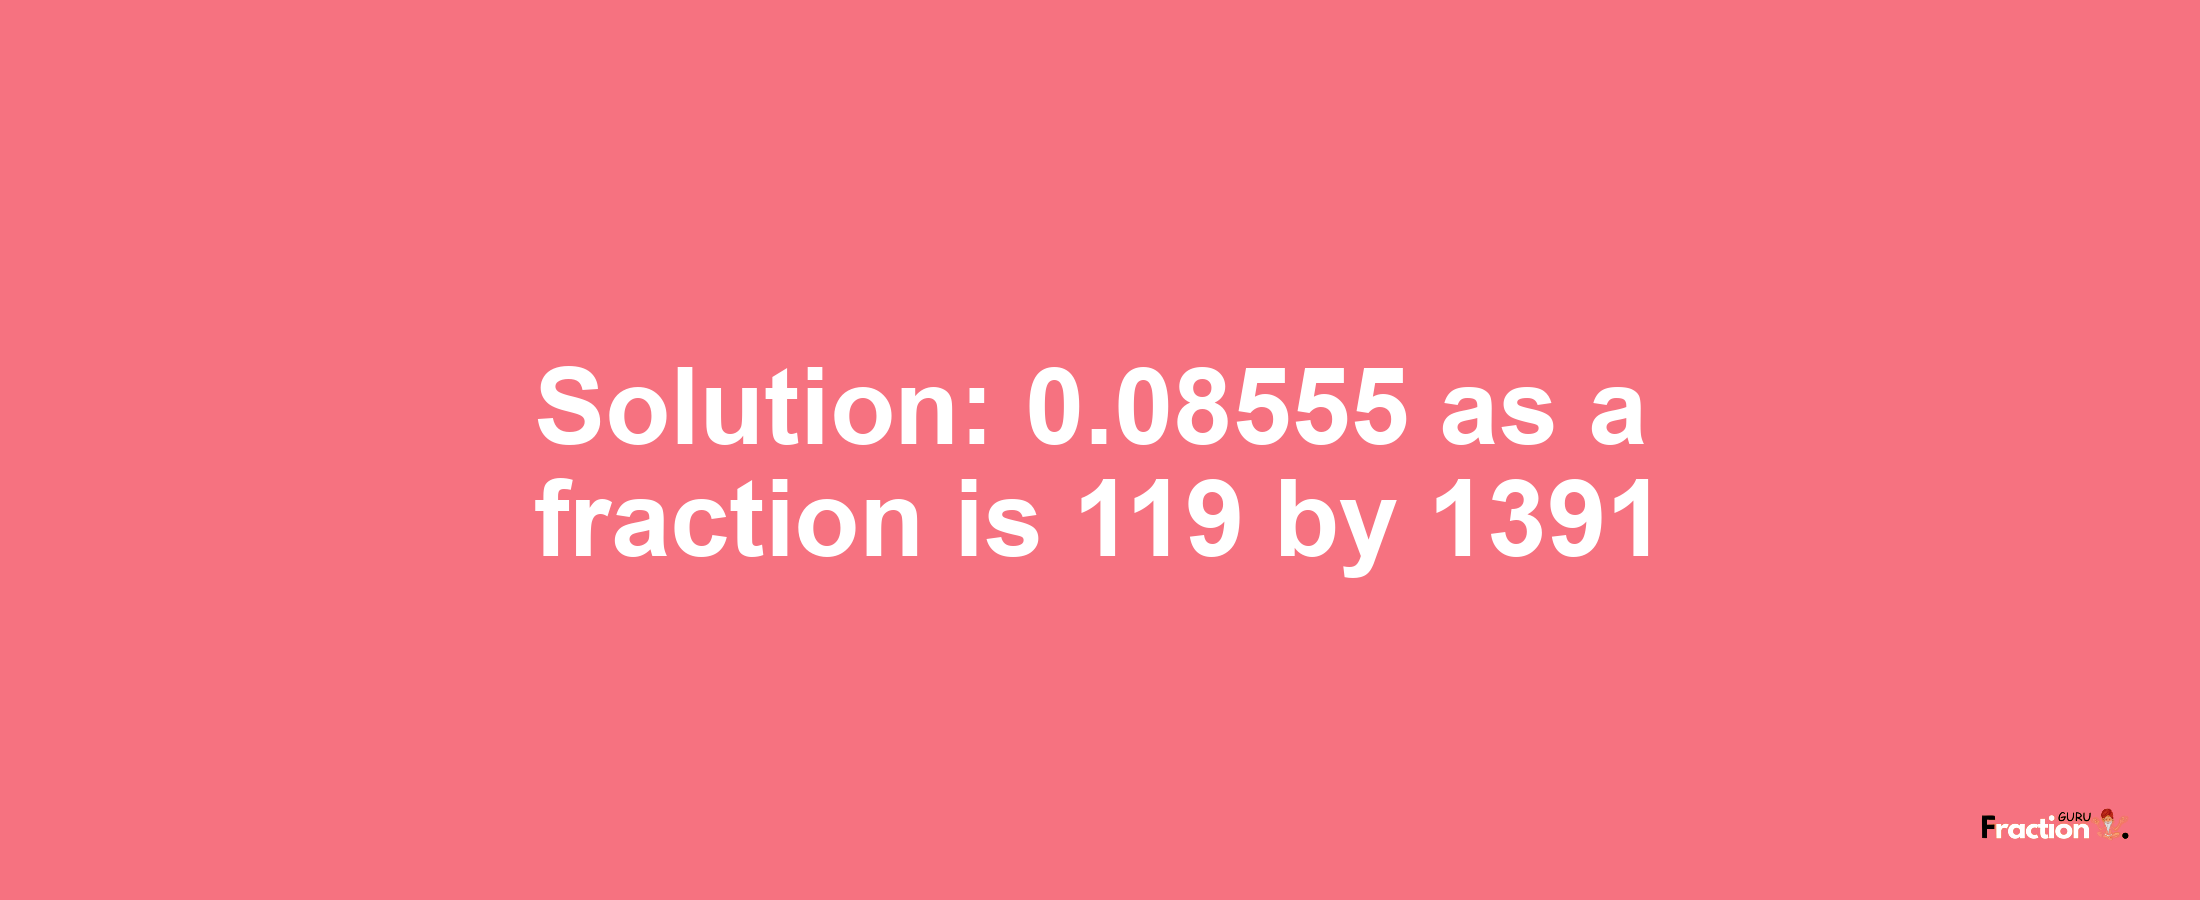 Solution:0.08555 as a fraction is 119/1391